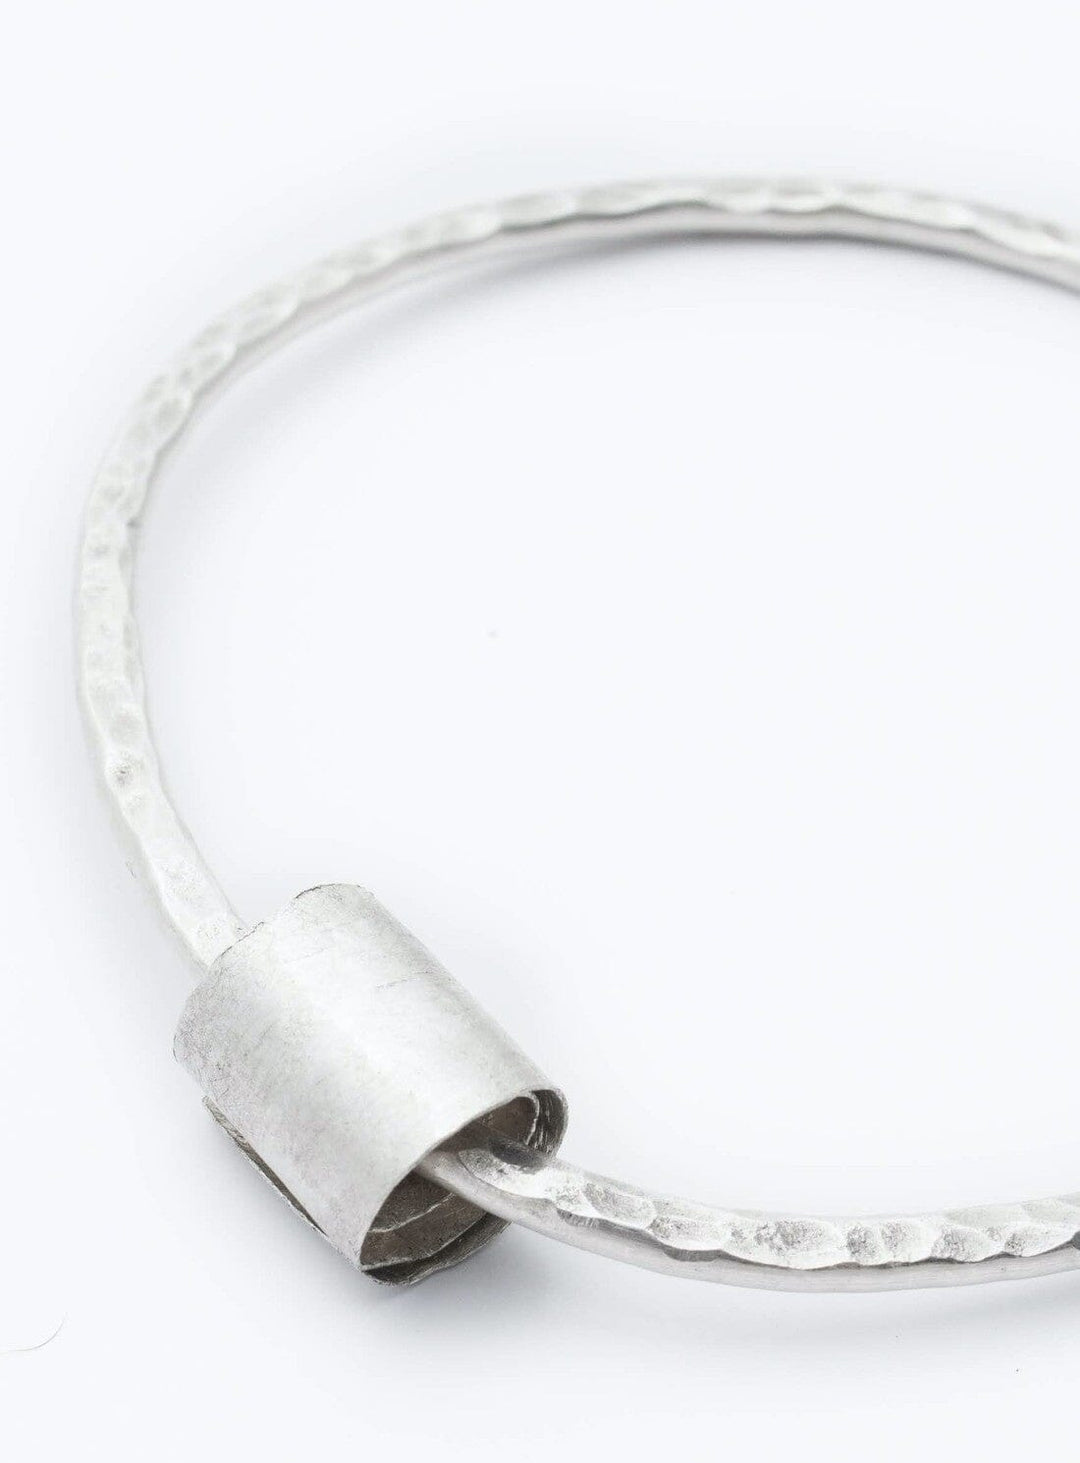 Hammered Heavy Eco-Silver Rip-Curl Bangle Bracelets YBDFinds 